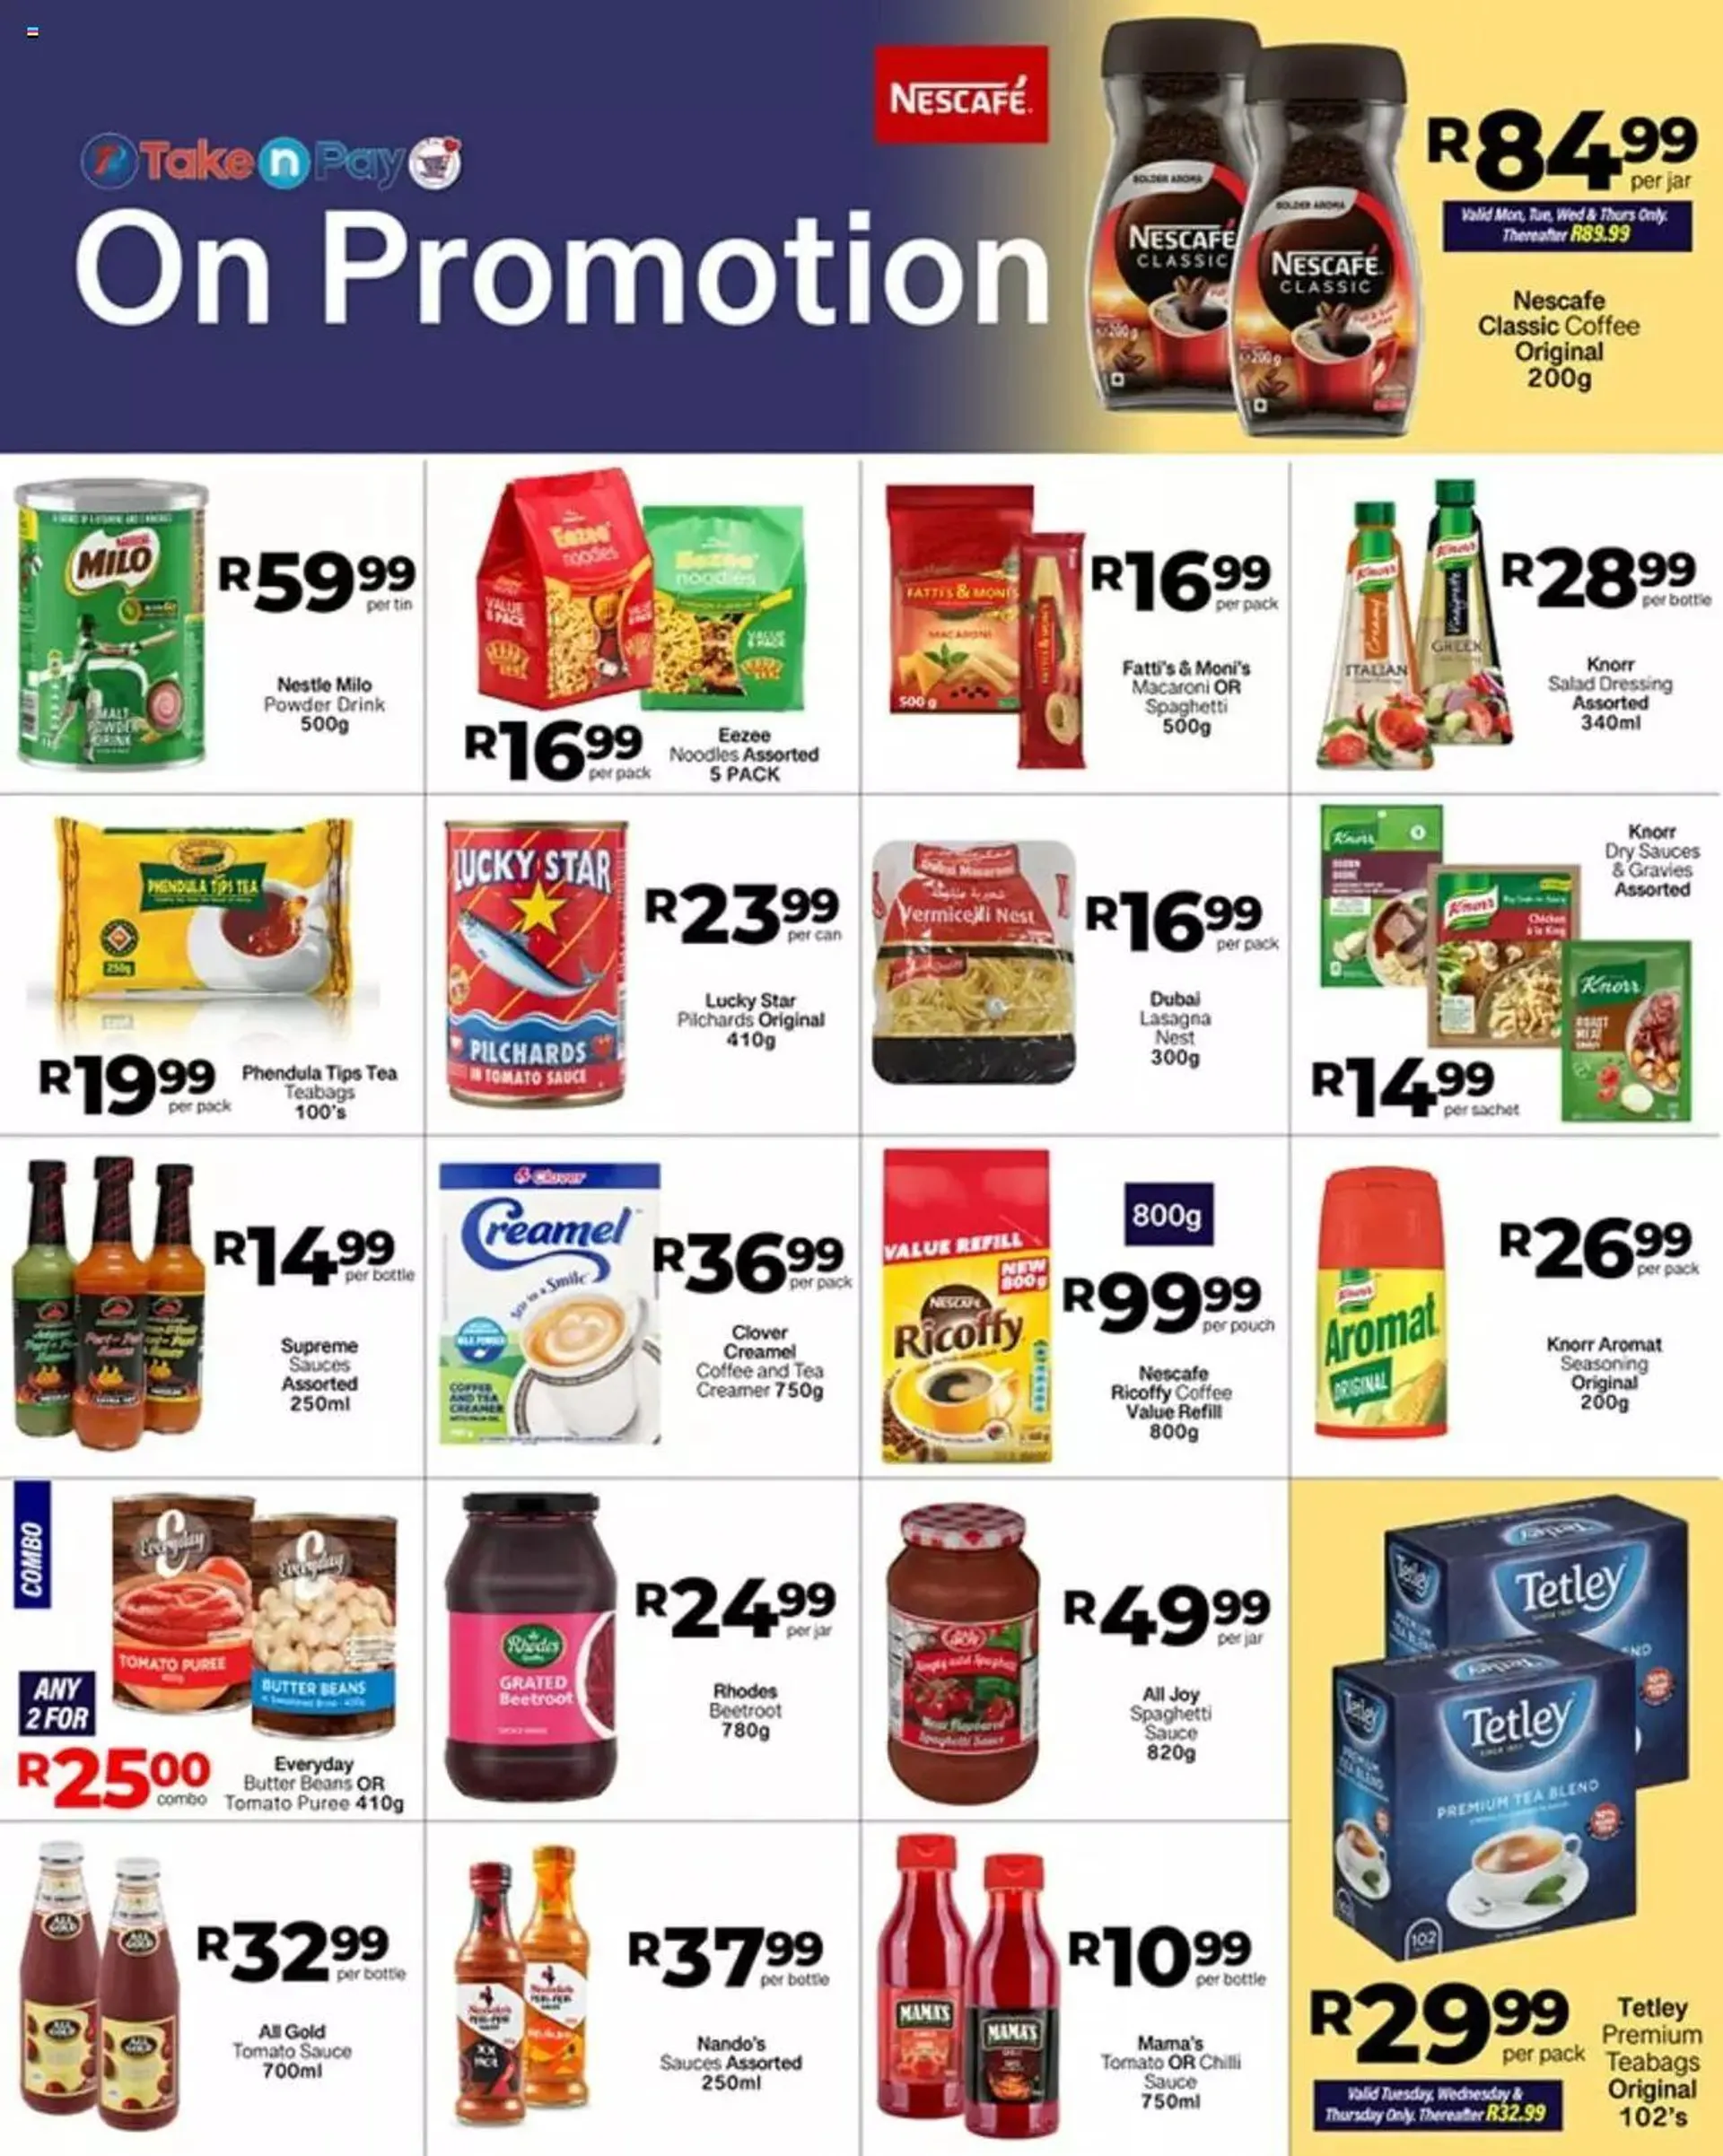 Take n Pay Specials - 1